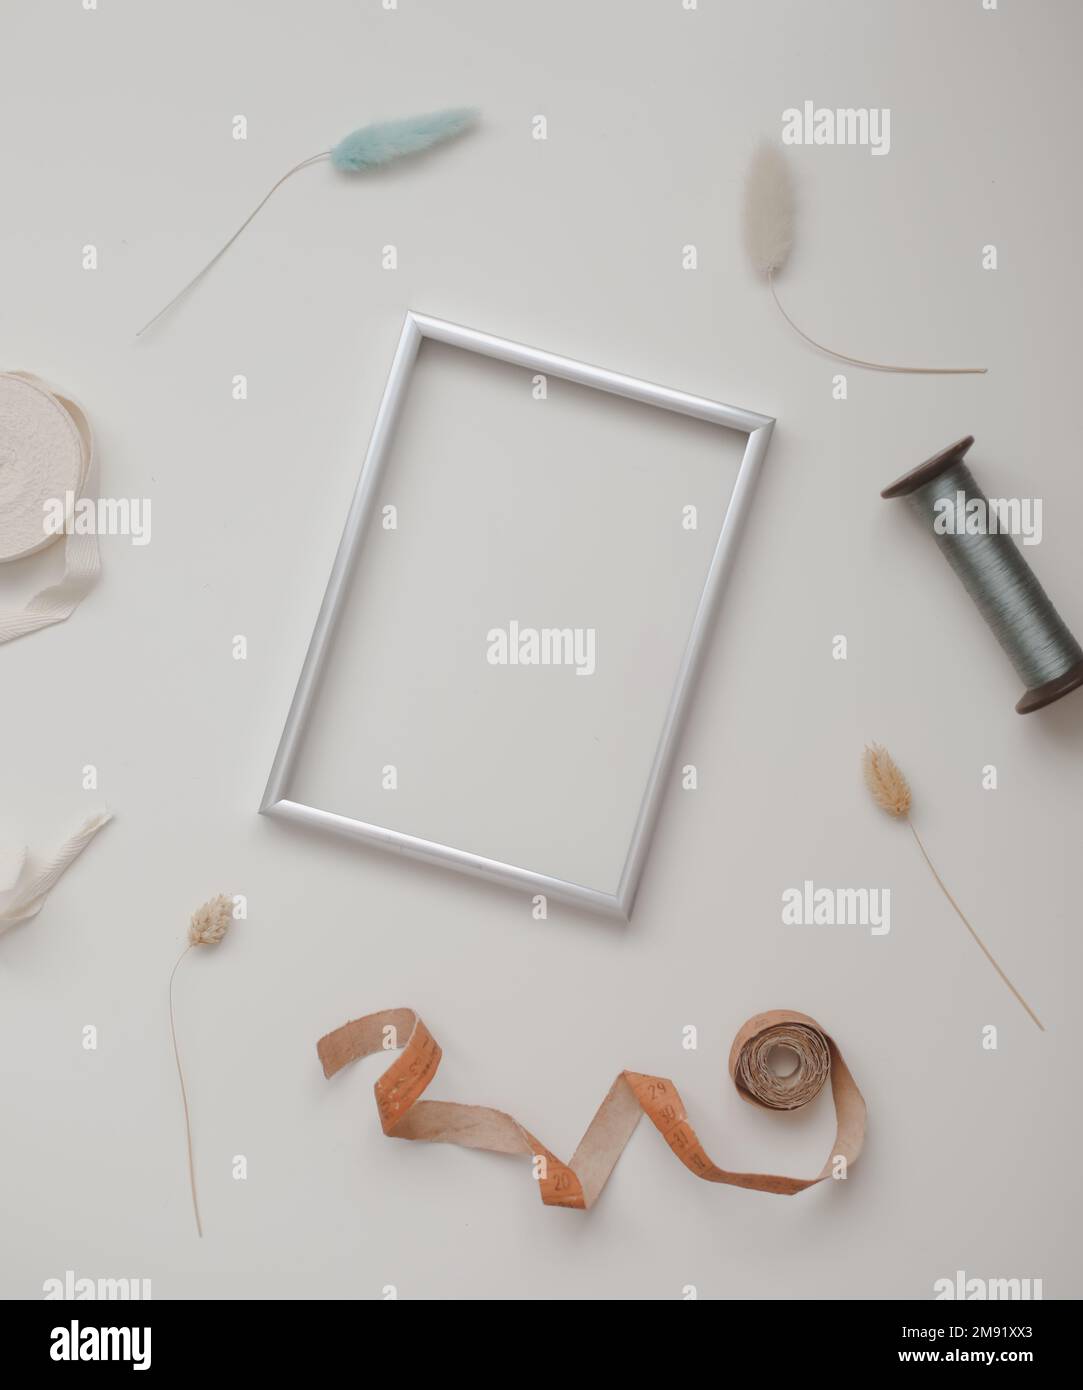 minimal mockup with blank frame with sewing thread and sewing items on white background, flatlay, top view, copy space Stock Photo